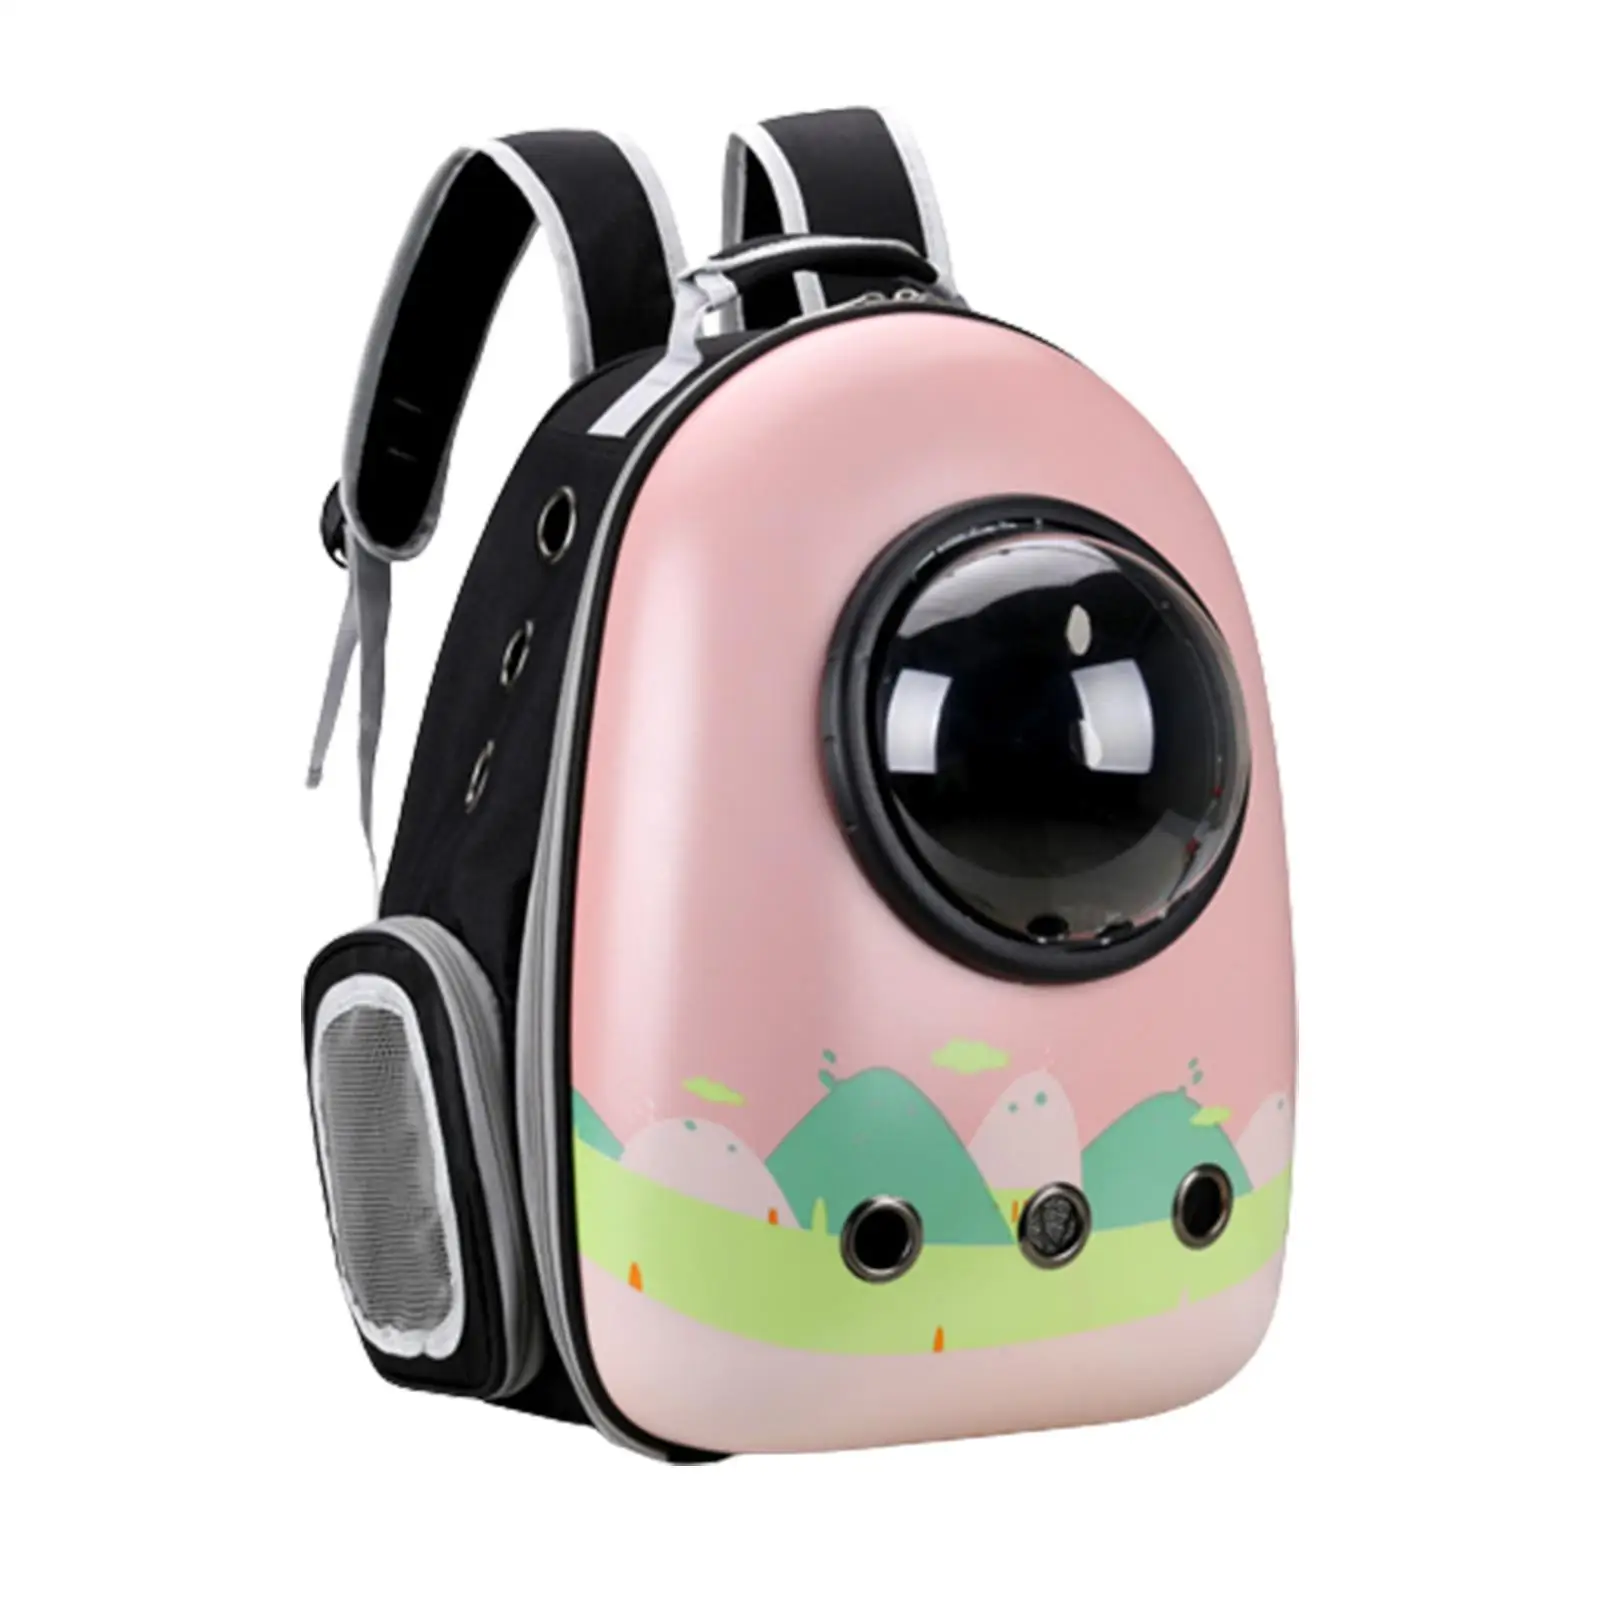 Cat Carrier Backpack Carrying Bag Ventilation Transparent Small Dogs Cats Travel Carrier for Hiking Outdoor Use Traveling